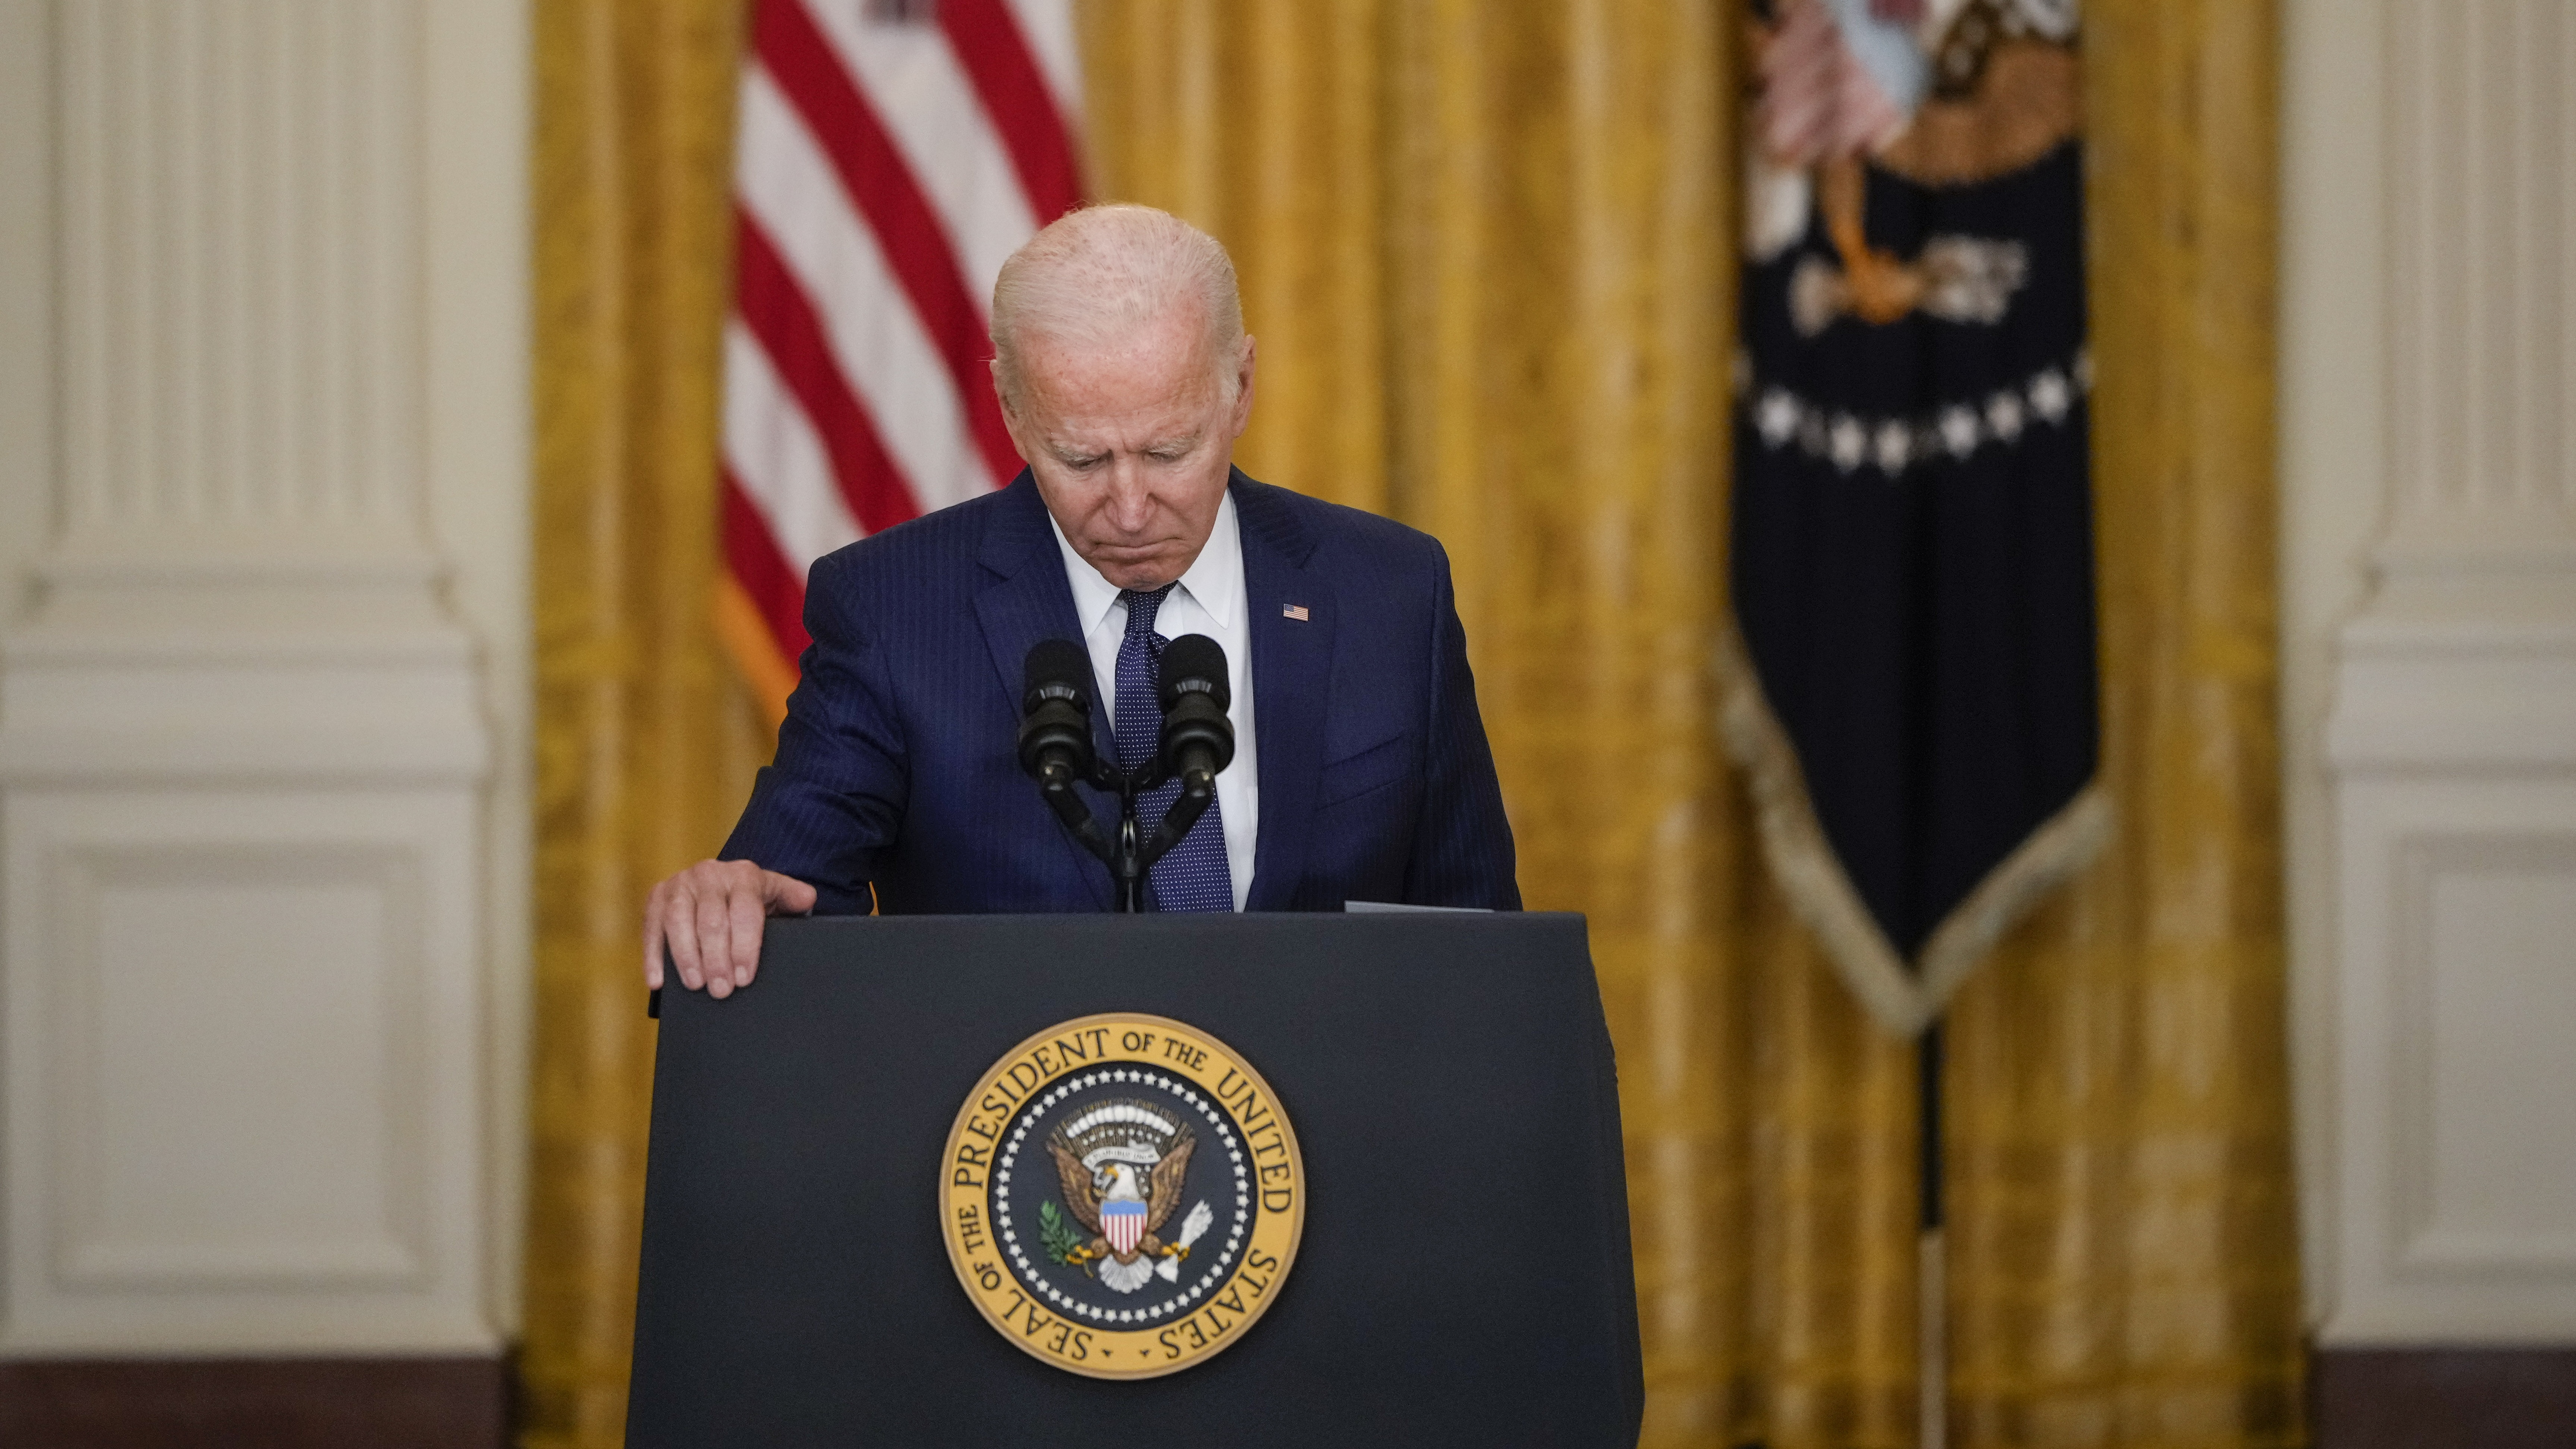 President Joe Biden pauses while he speaks about the situation in Afghanistan in the East Room of the White House on August 26, 2021 in Washington, DC.